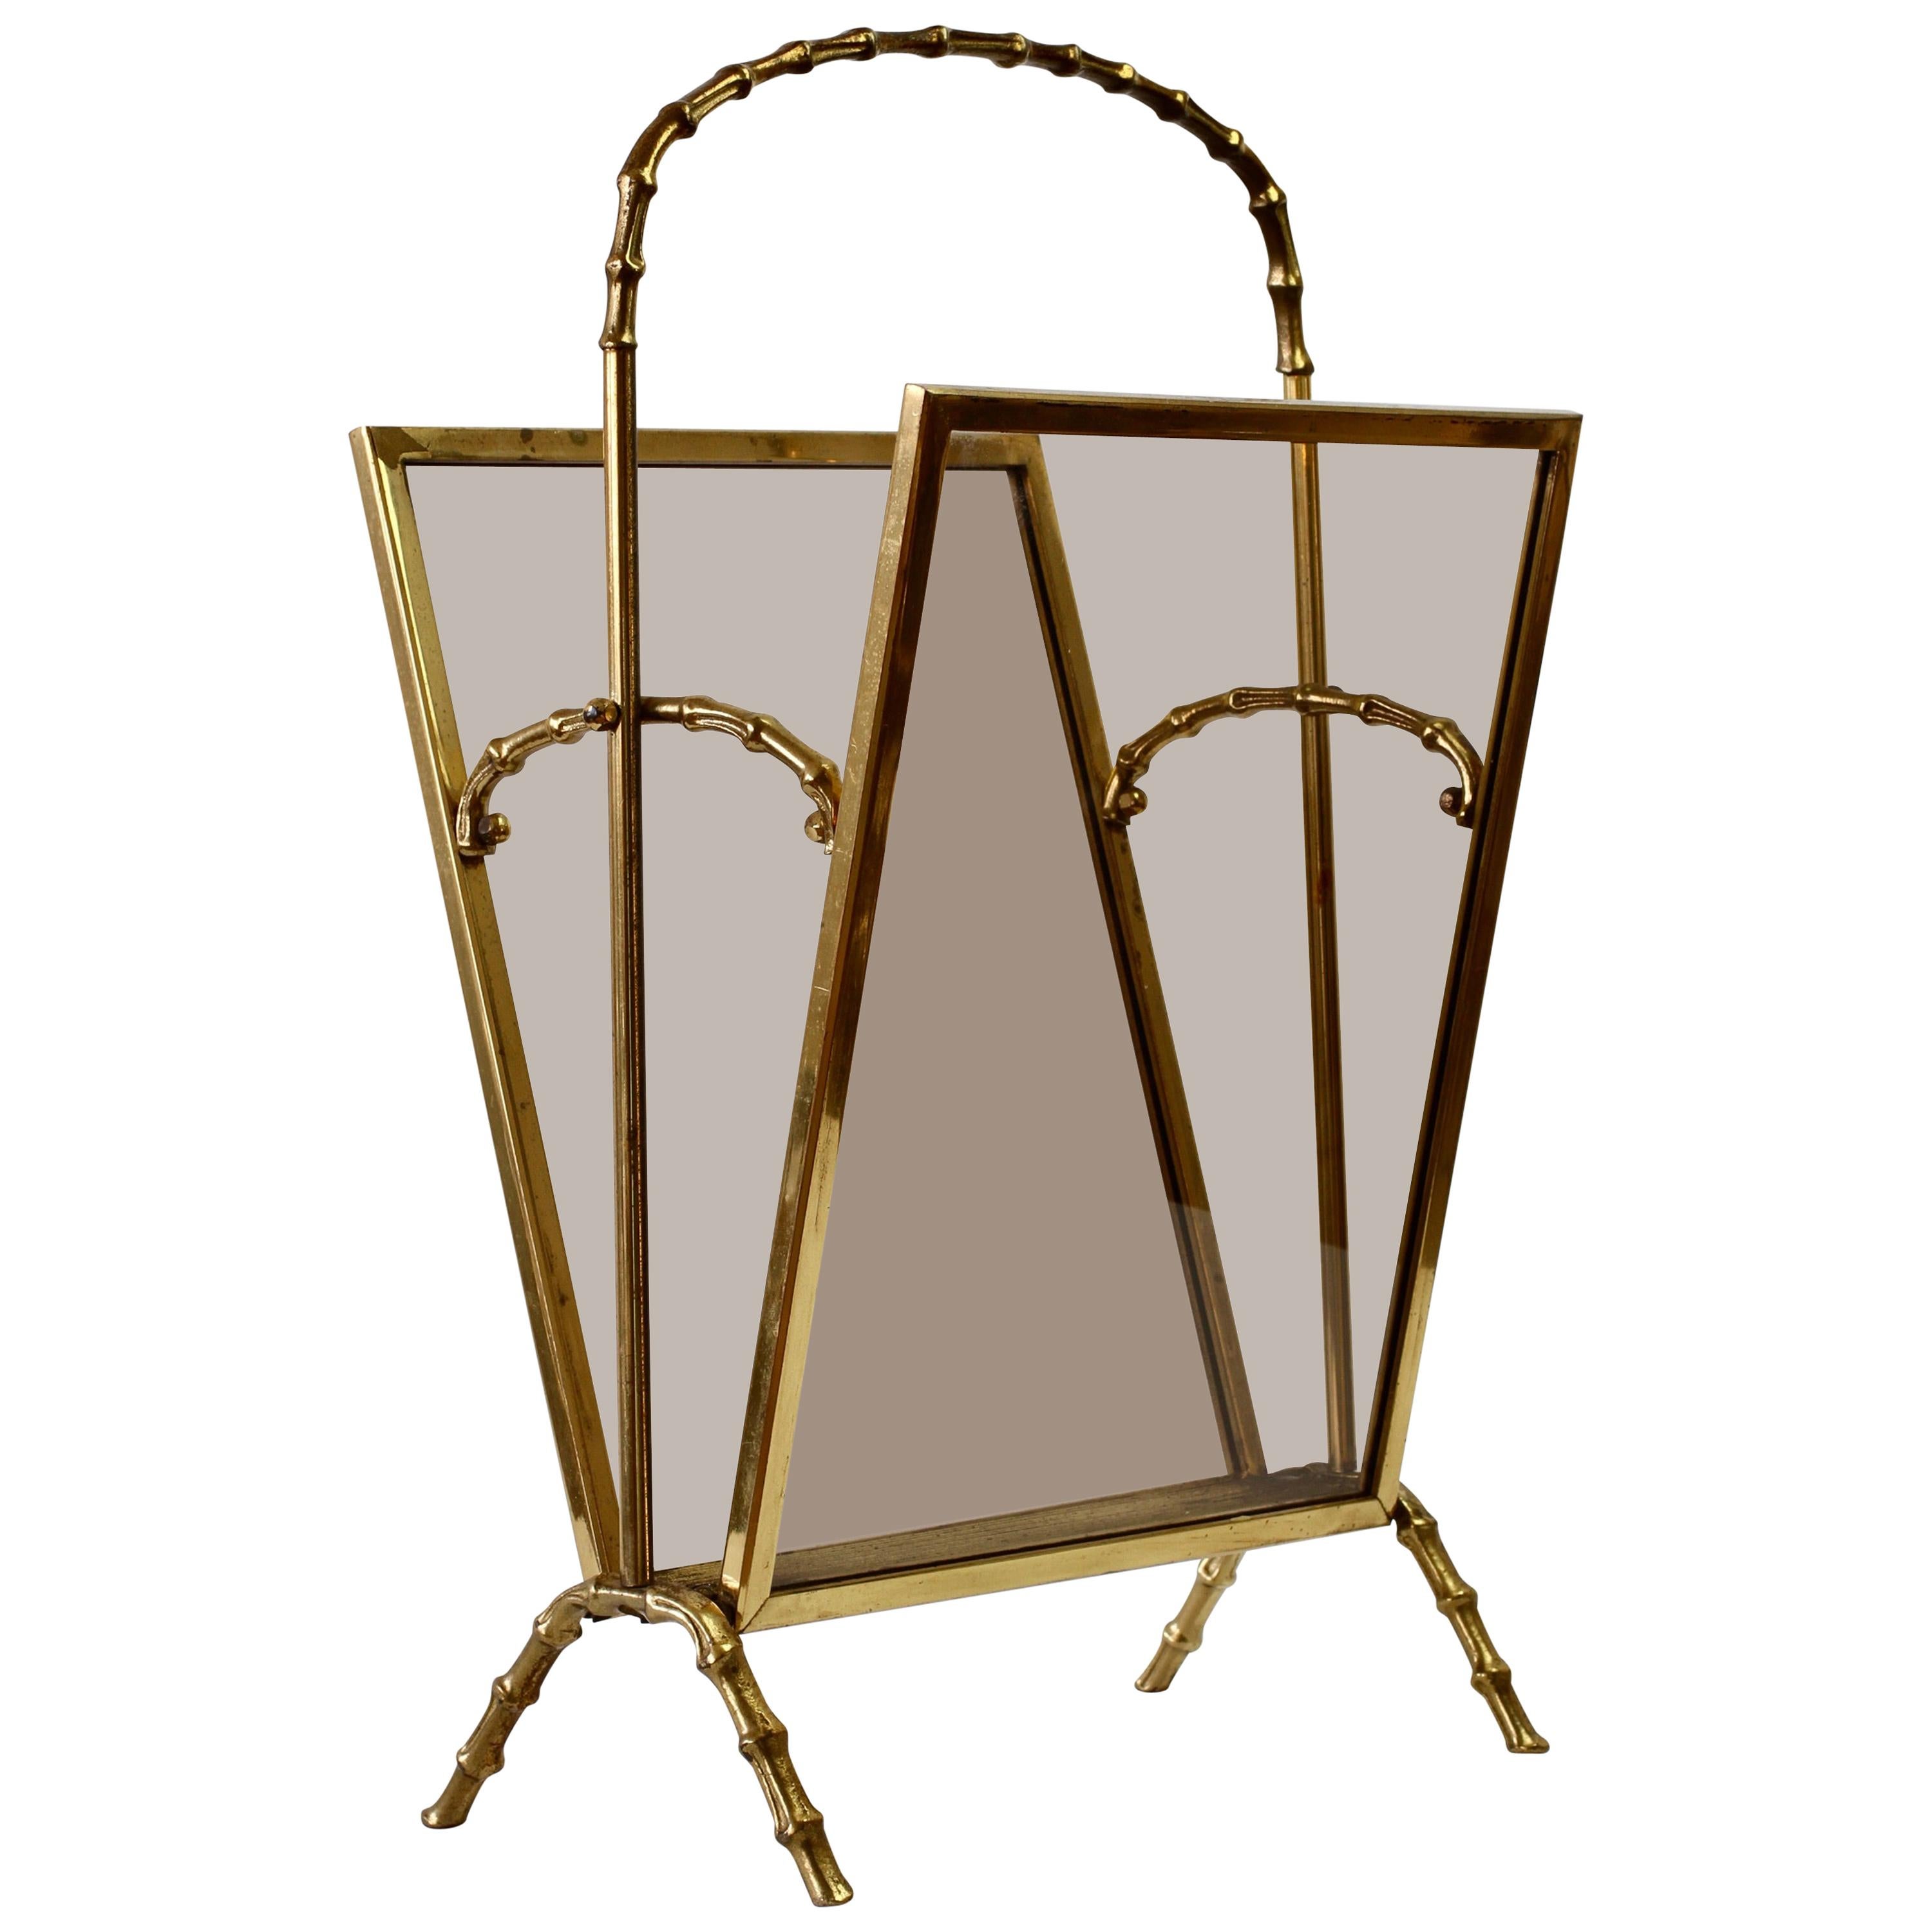 Maison Baguès Attr. Cast Brass Faux Bamboo Magazine Rack or Newspaper Stand For Sale